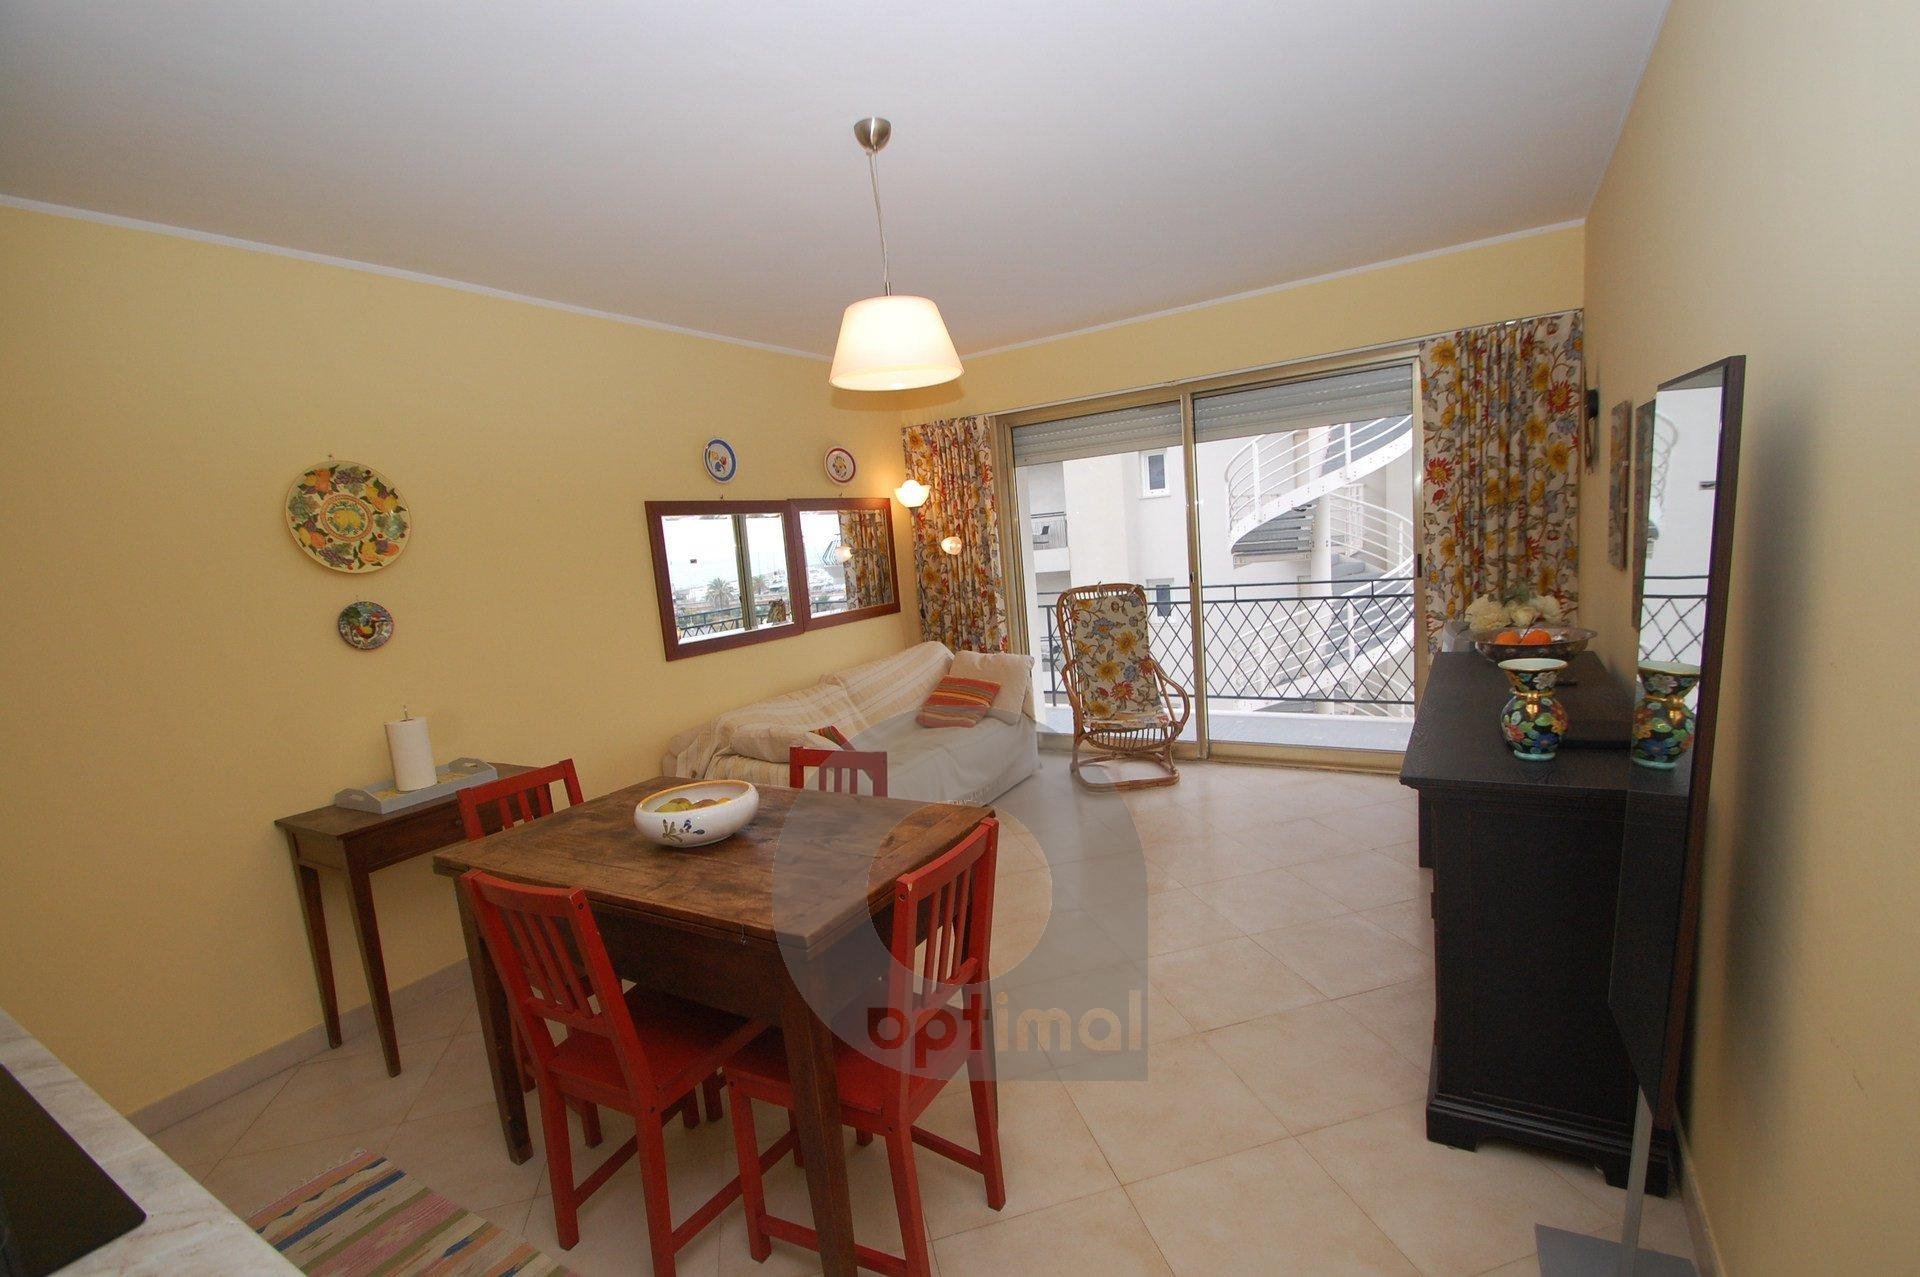 Beautiful 2 rooms apartment with terrace and lateral seaview very close to the center